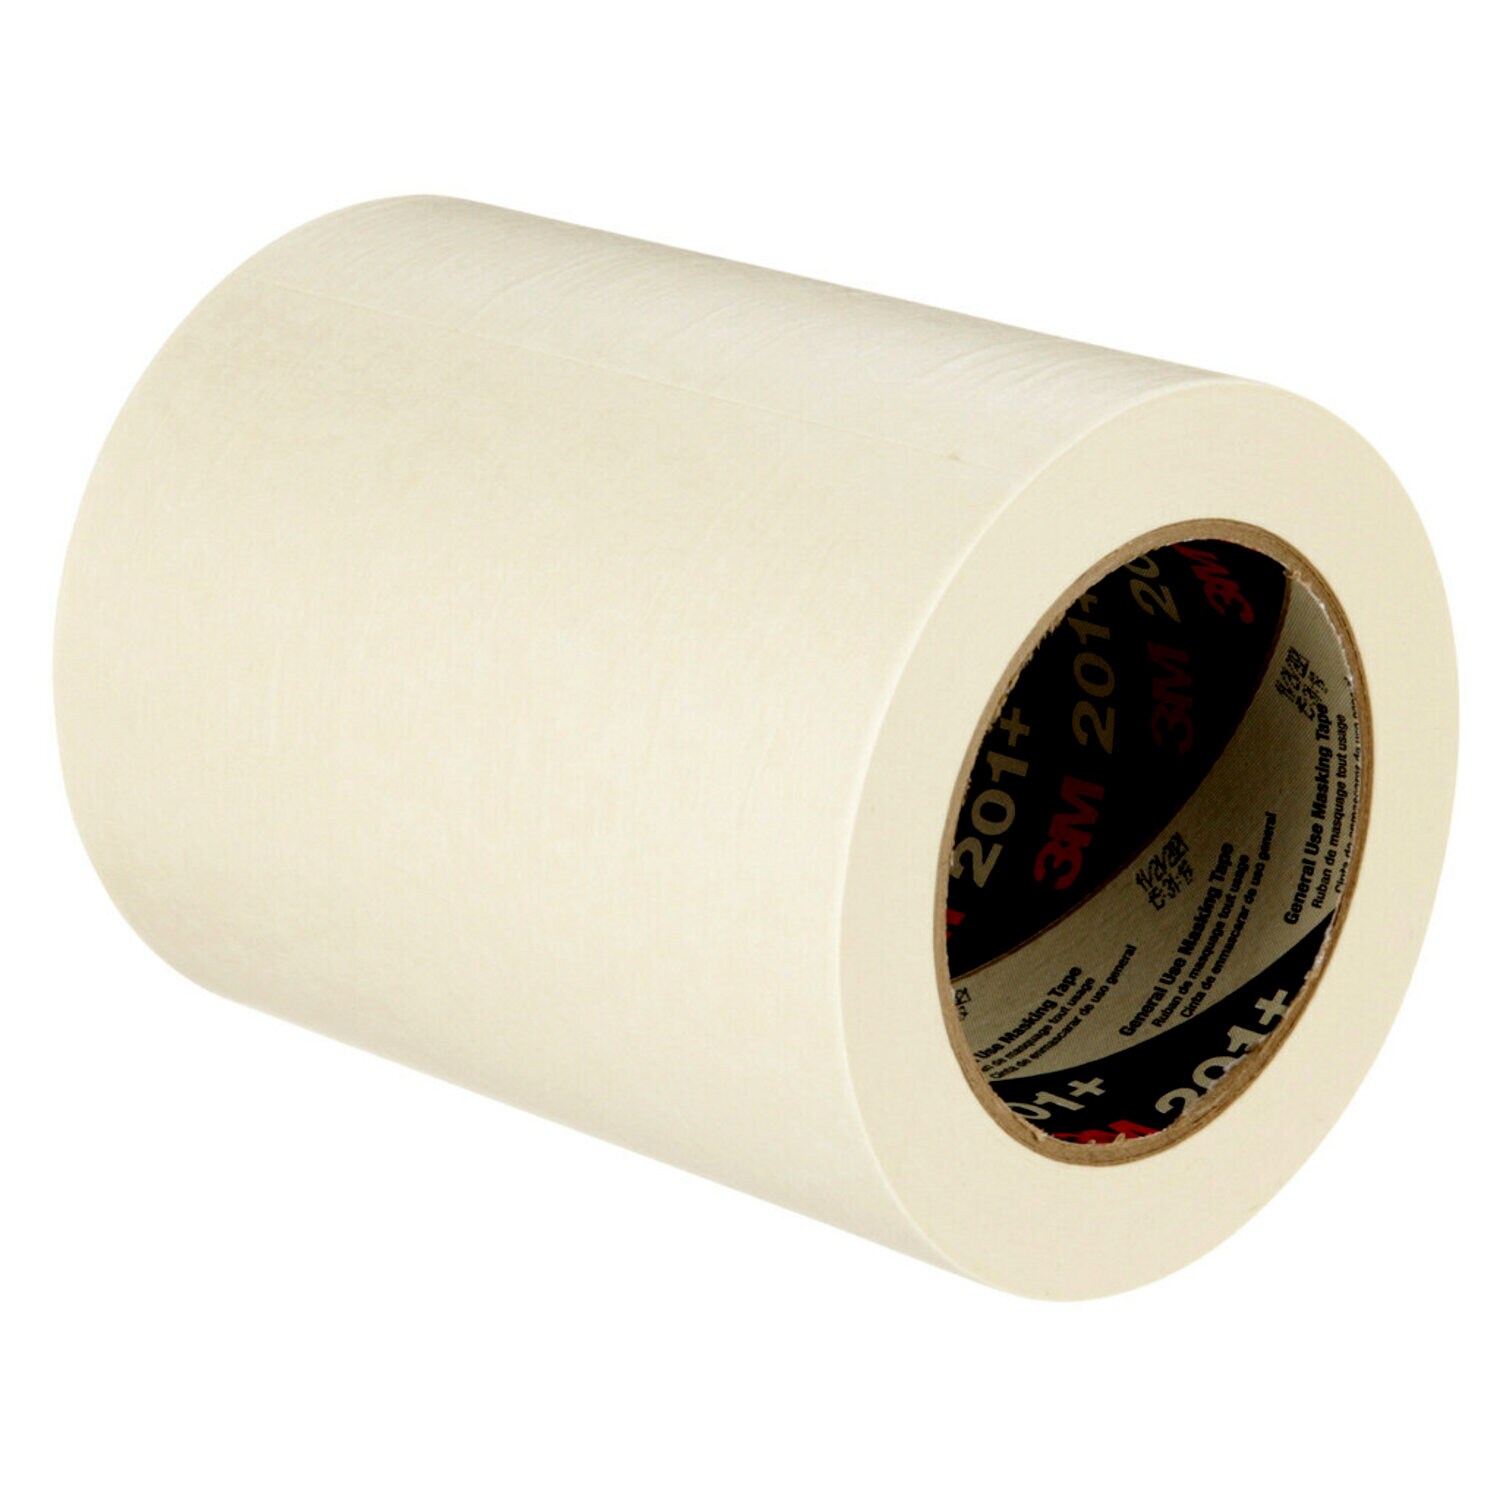 00051115814358, 3M General Use Masking Tape 201+, Tan, 144 mm x 55 m, 4.4  mil, 8 Roll/Case, Aircraft products, masking-tapes